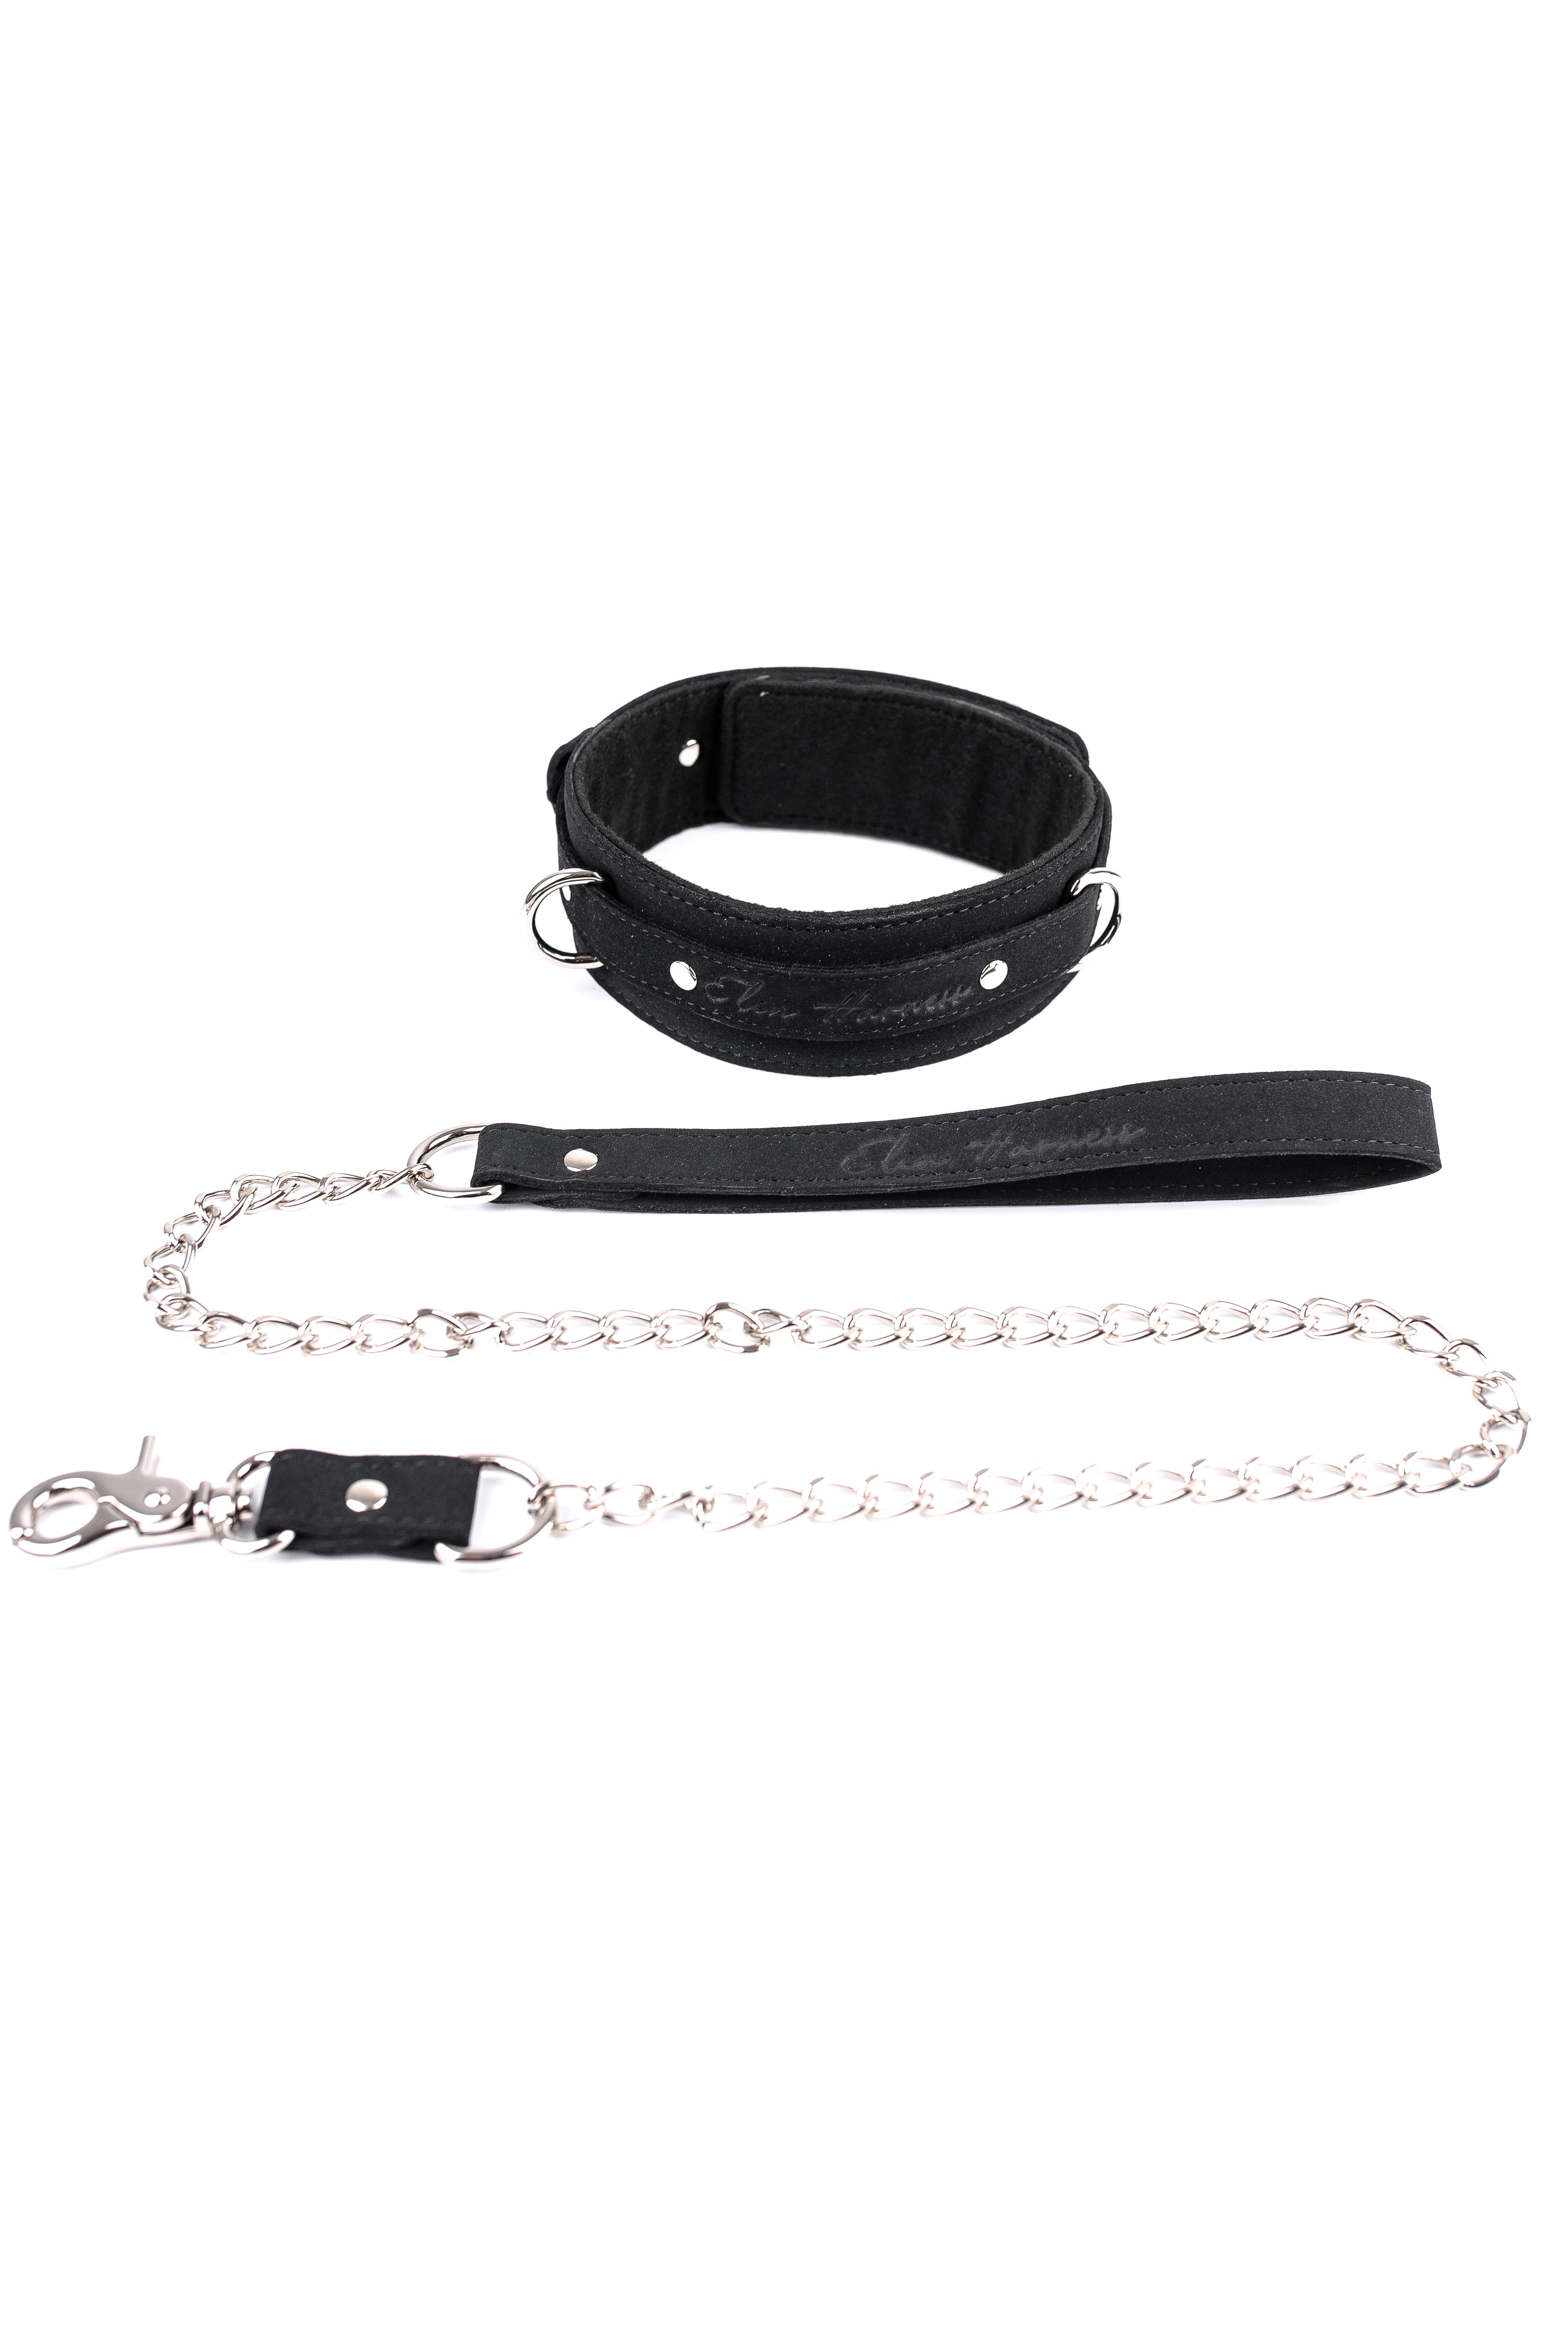 Faux Leather Choker with Chain leash